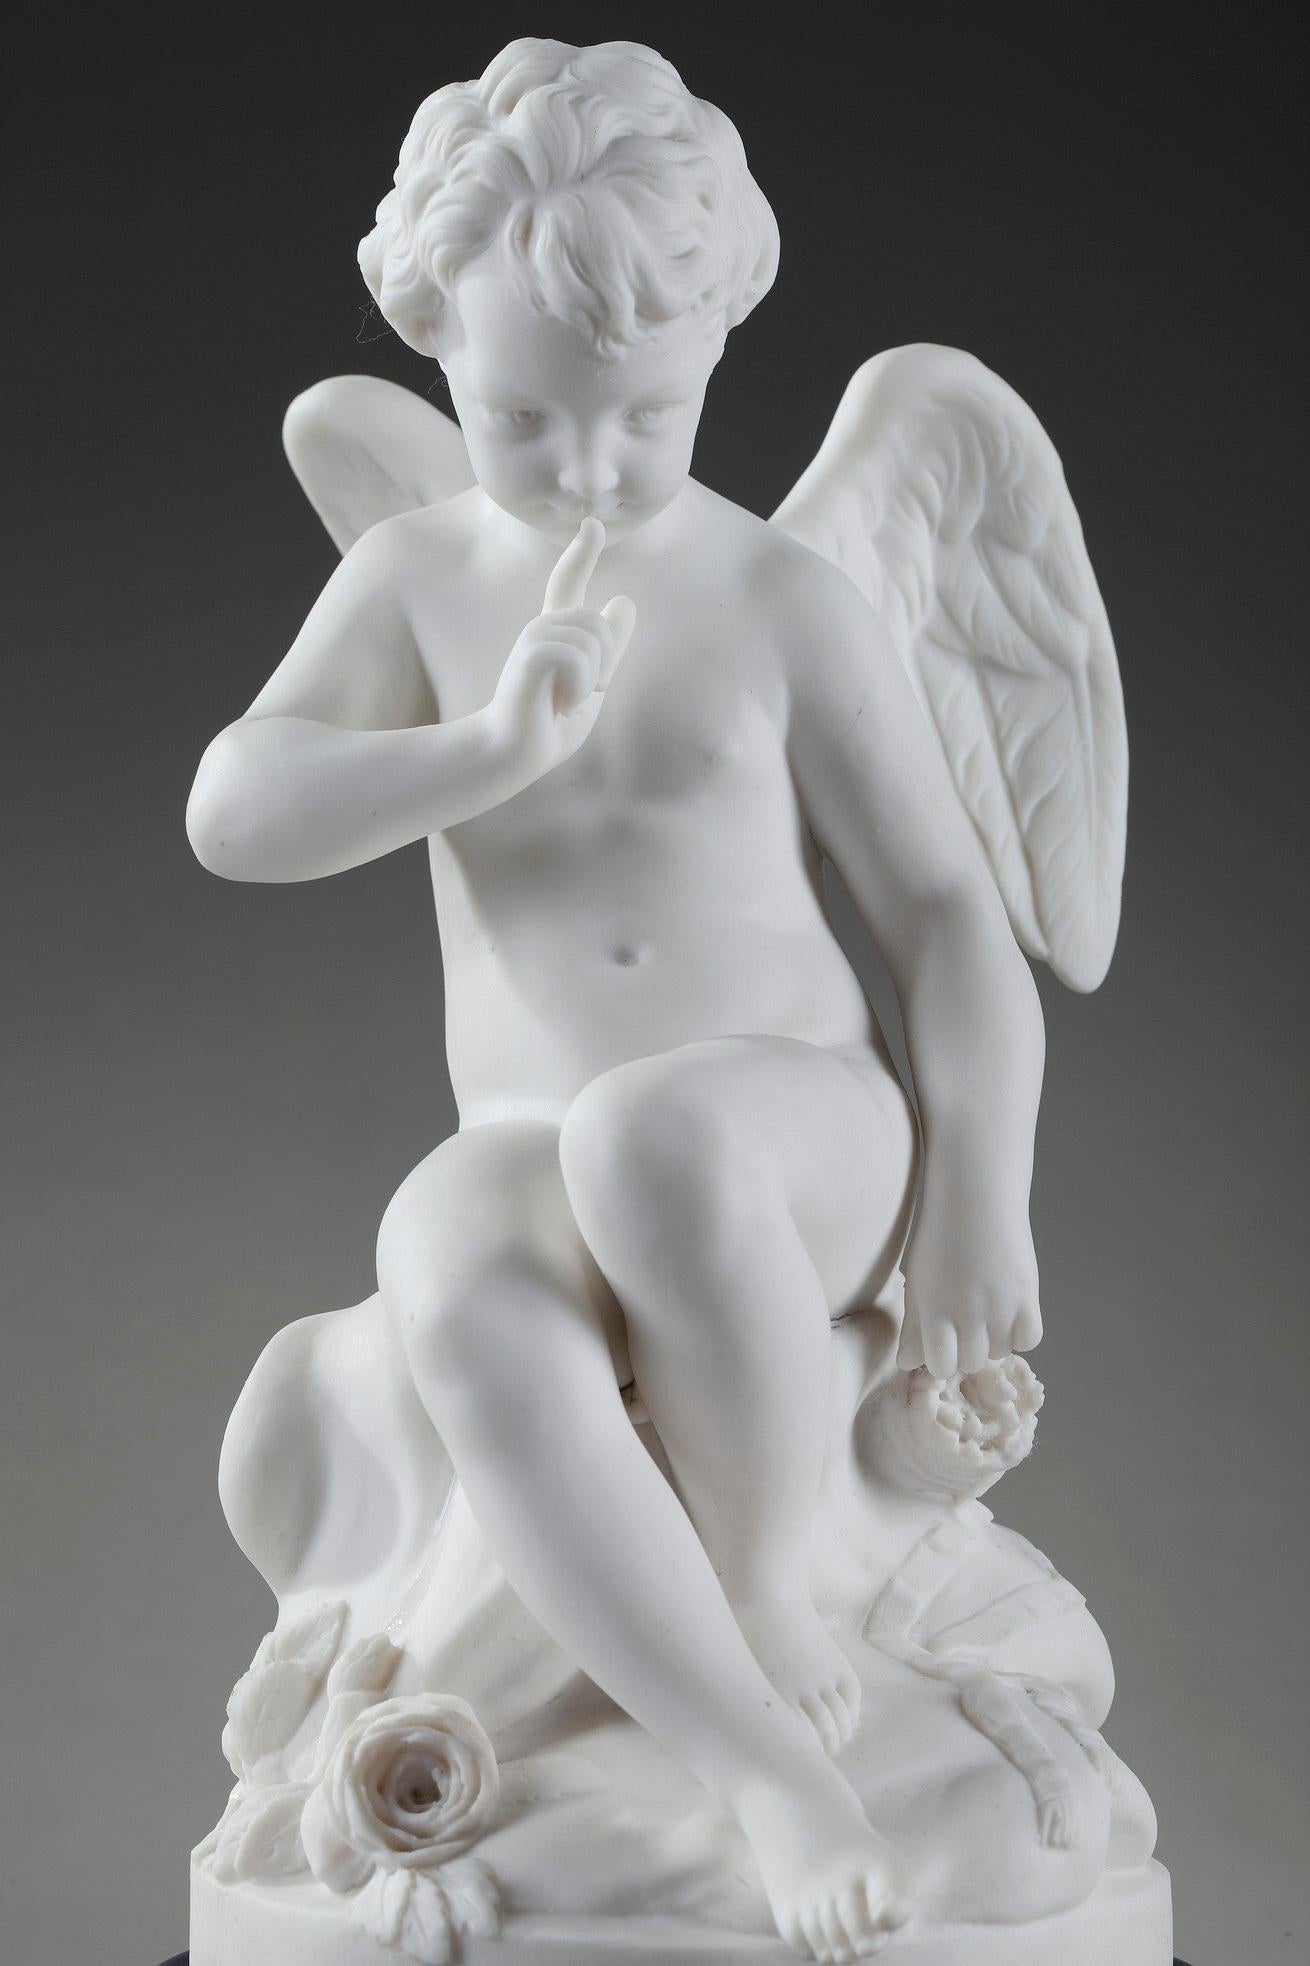 Bisque statue featuring L'Amour menaçant (Menacing Cupid) known as Falconet's Cupid, a famous work commissionned by Madame de Pompadour, mistress of Louis XV, whose model in plaster was presented at the Salon of 1755. Falconet realized several